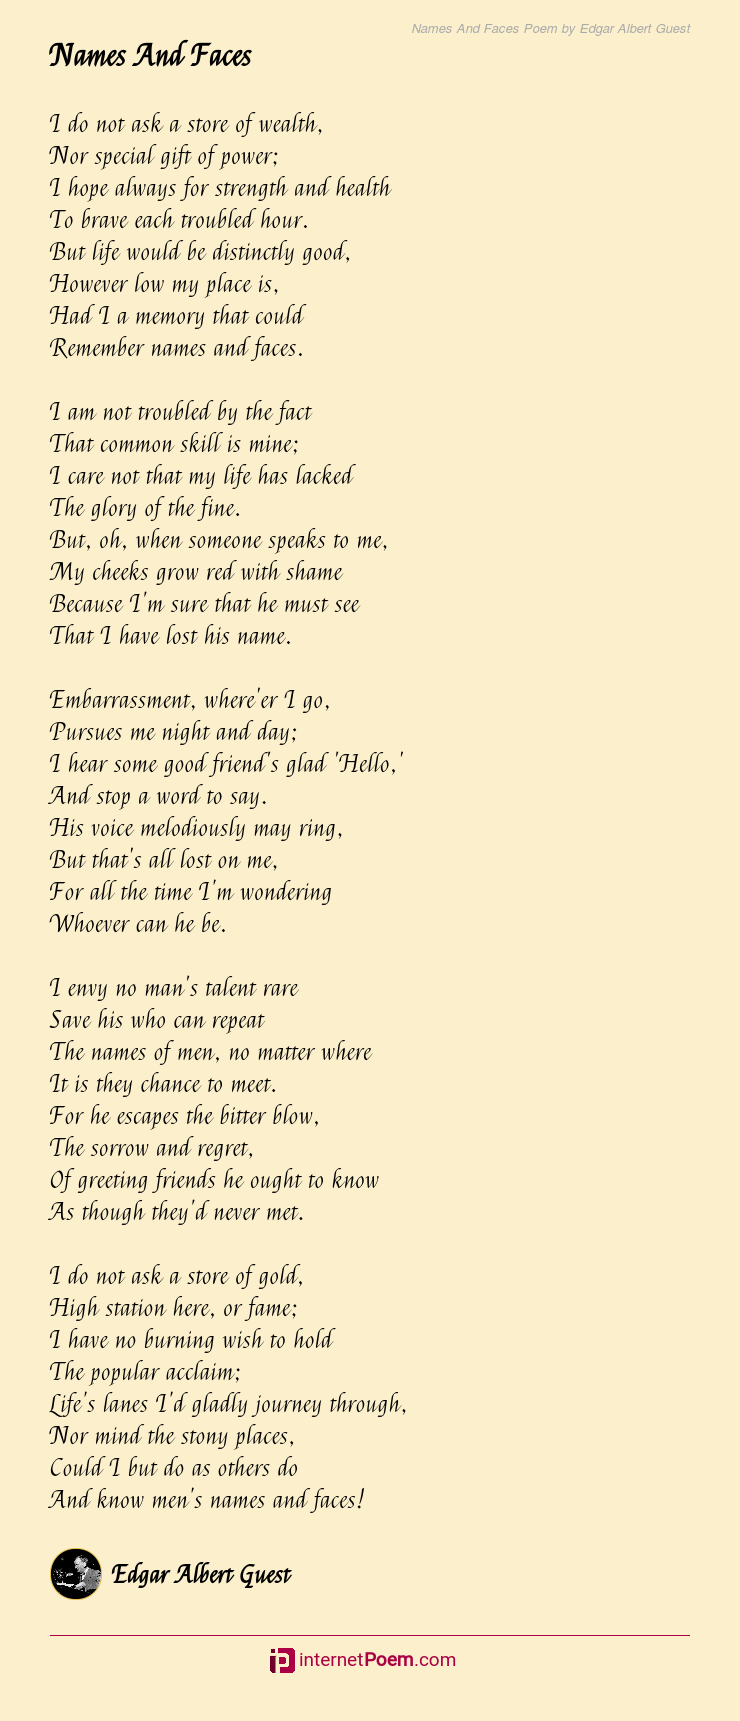 Names And Faces Poem by Edgar Albert Guest